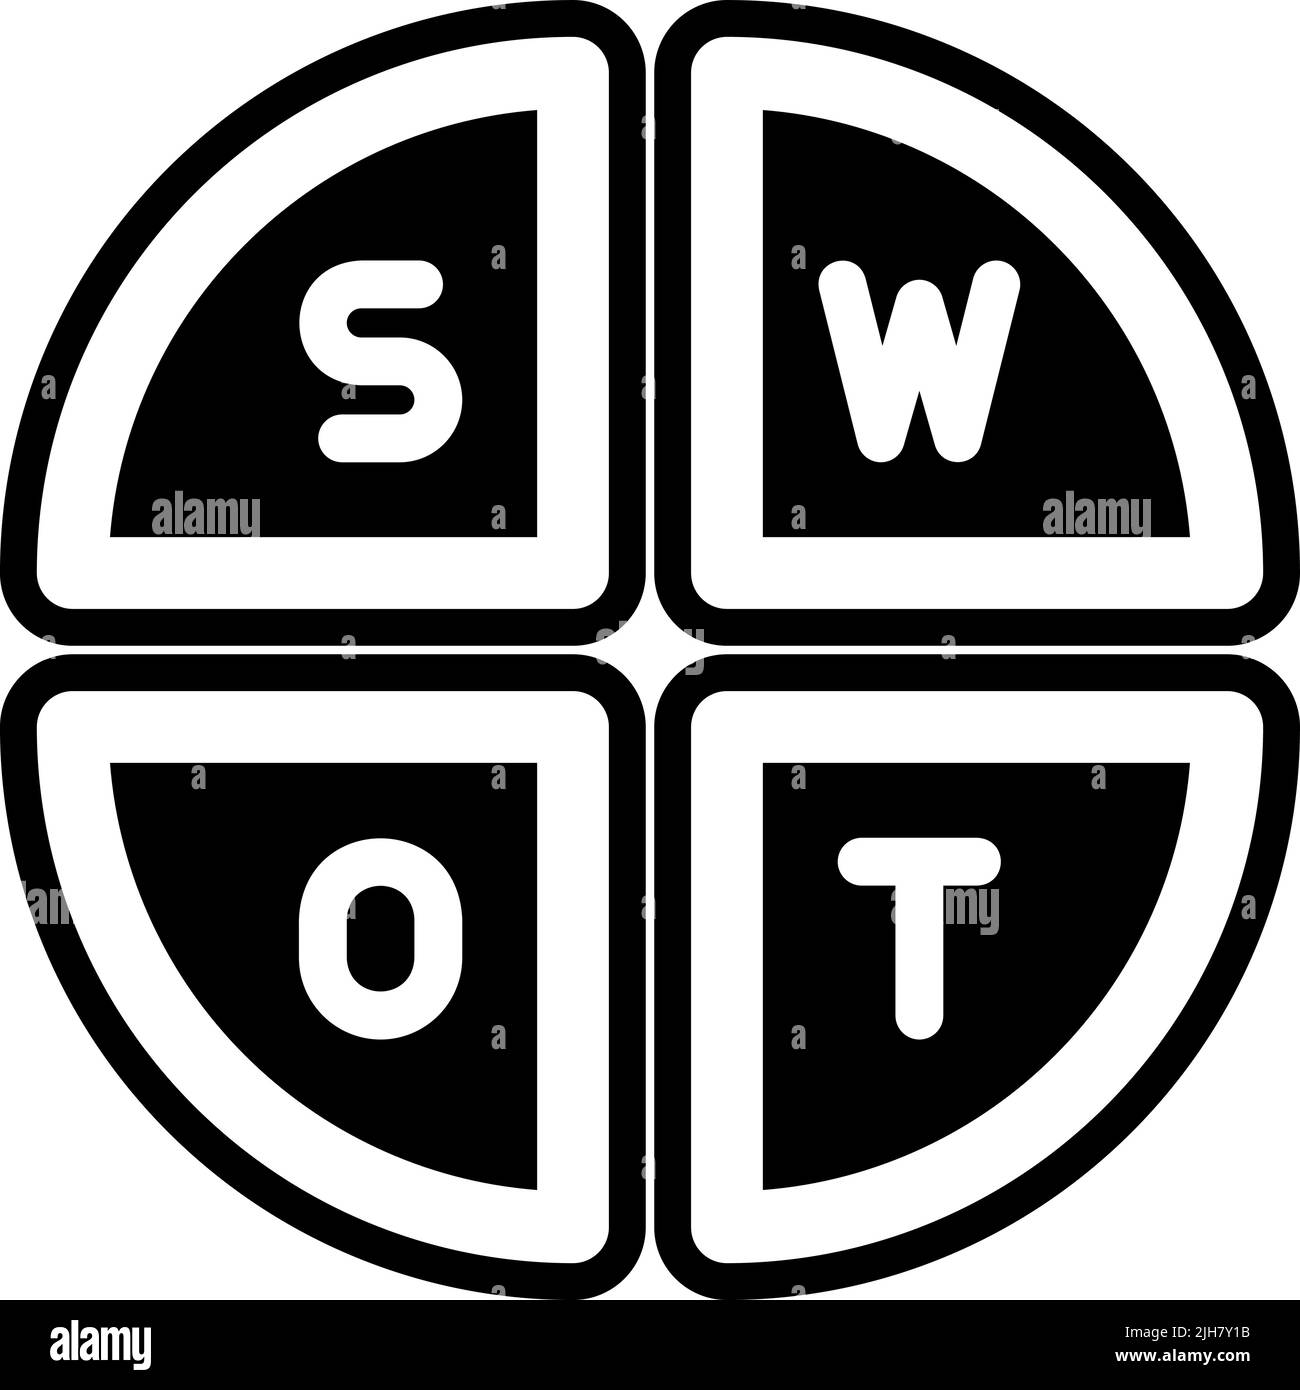 Business swot analysis icon Stock Vector